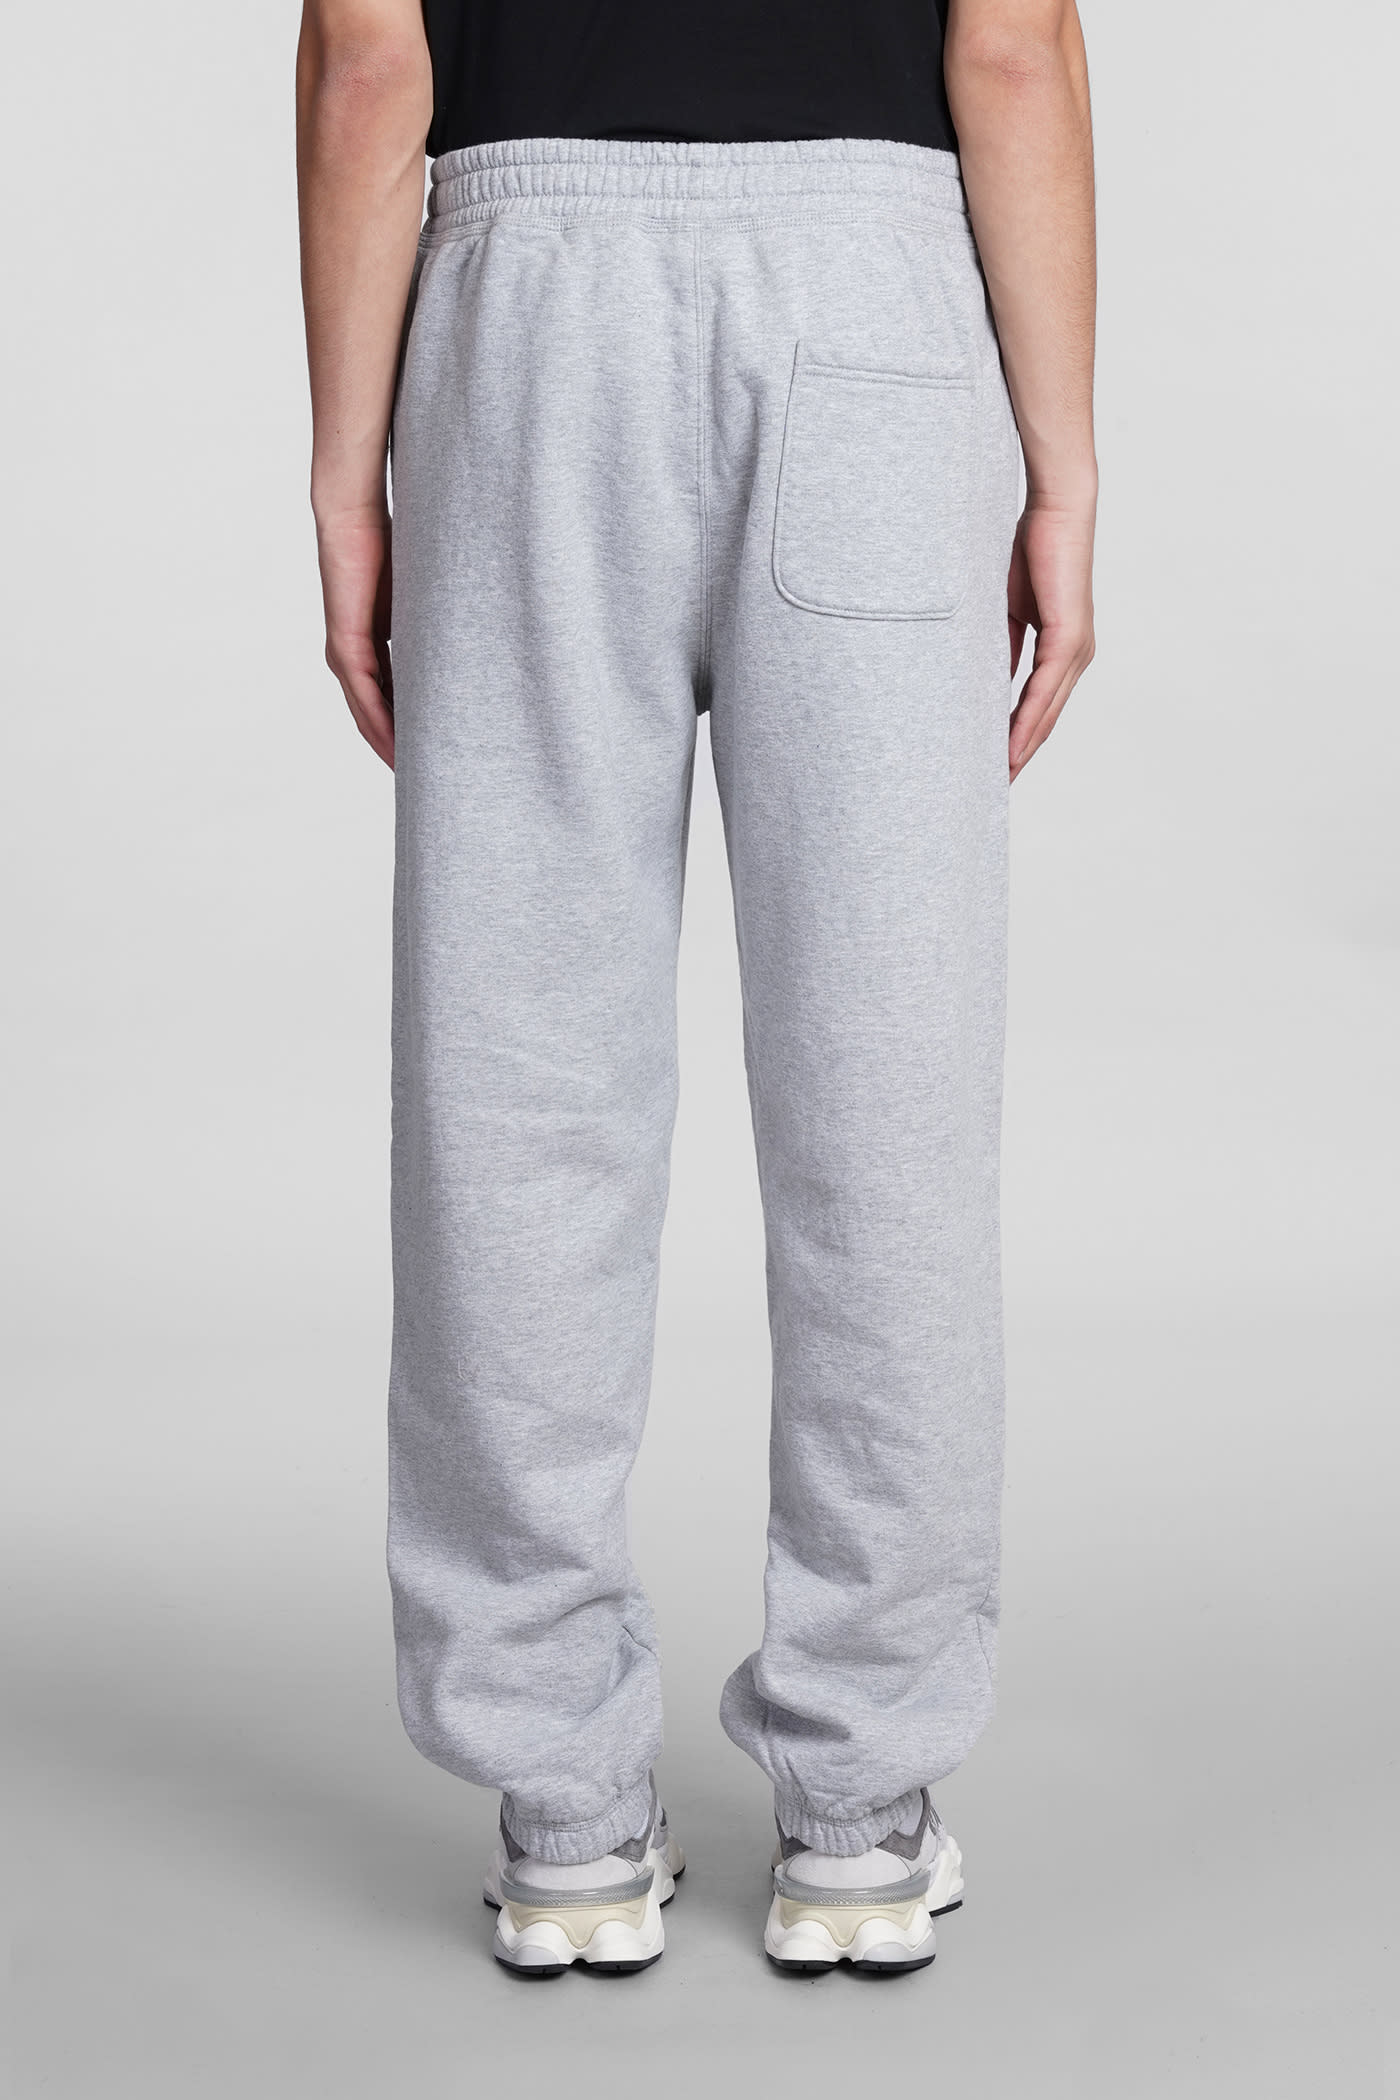 STUSSY PANTS IN GREY COTTON 